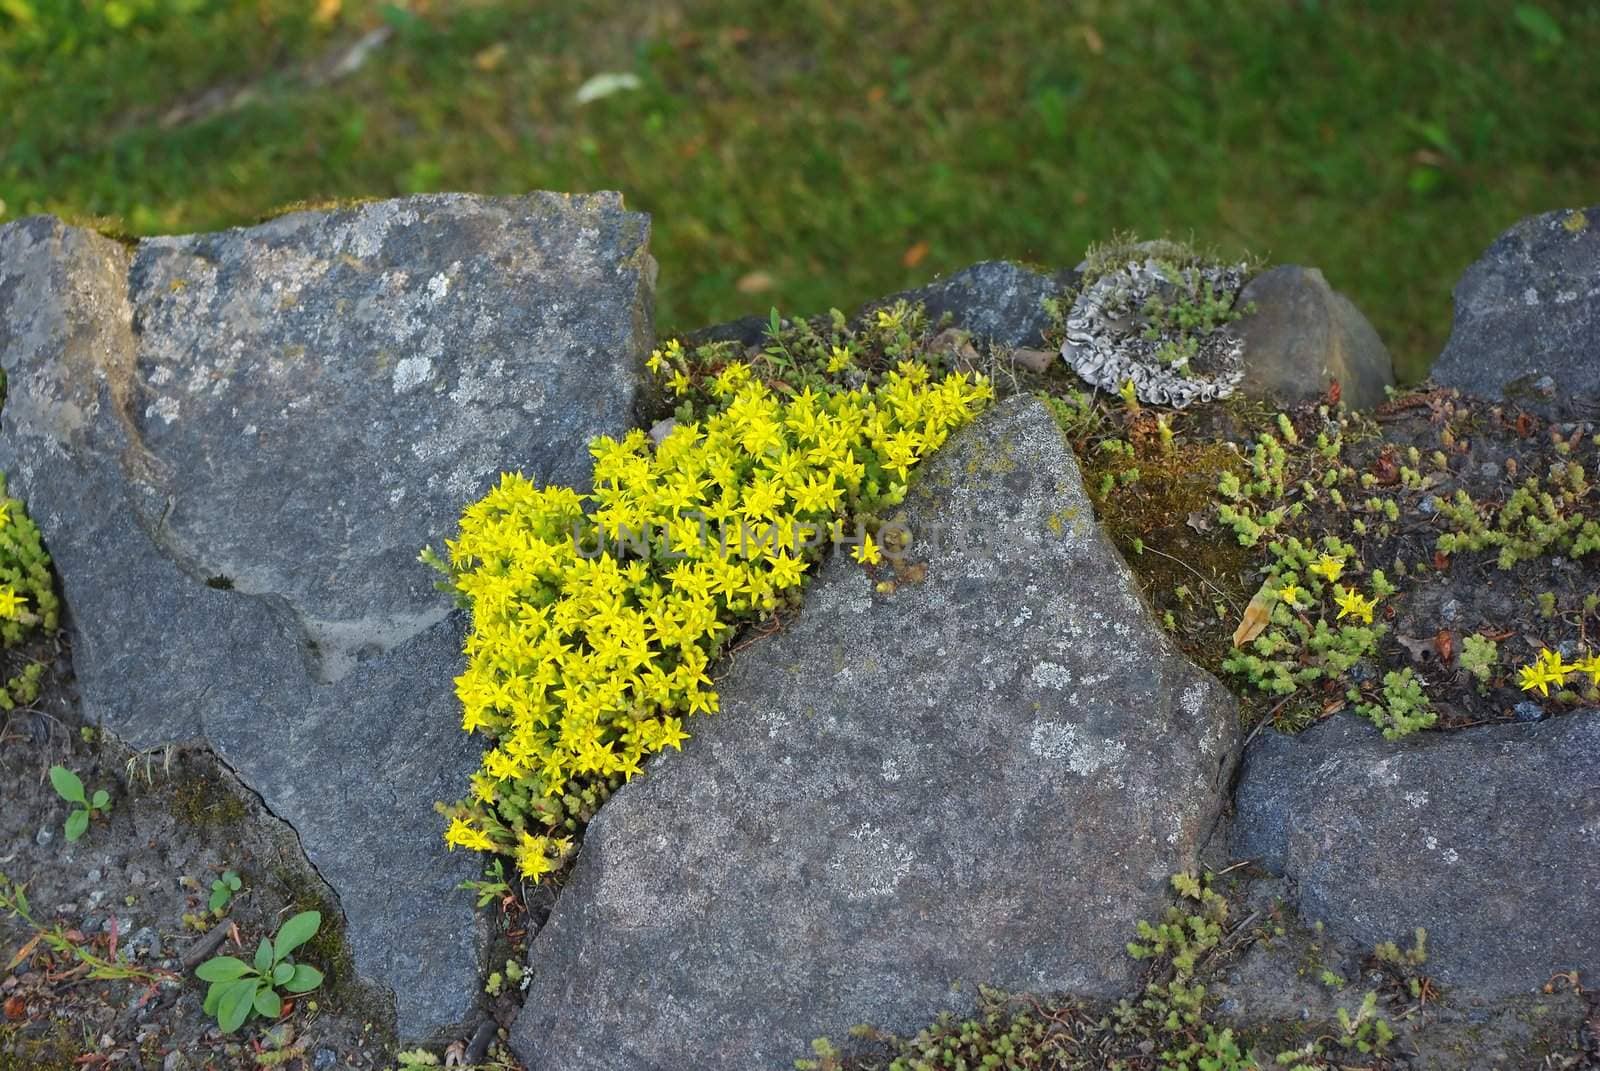 Moss in the garden with small yellow flowers